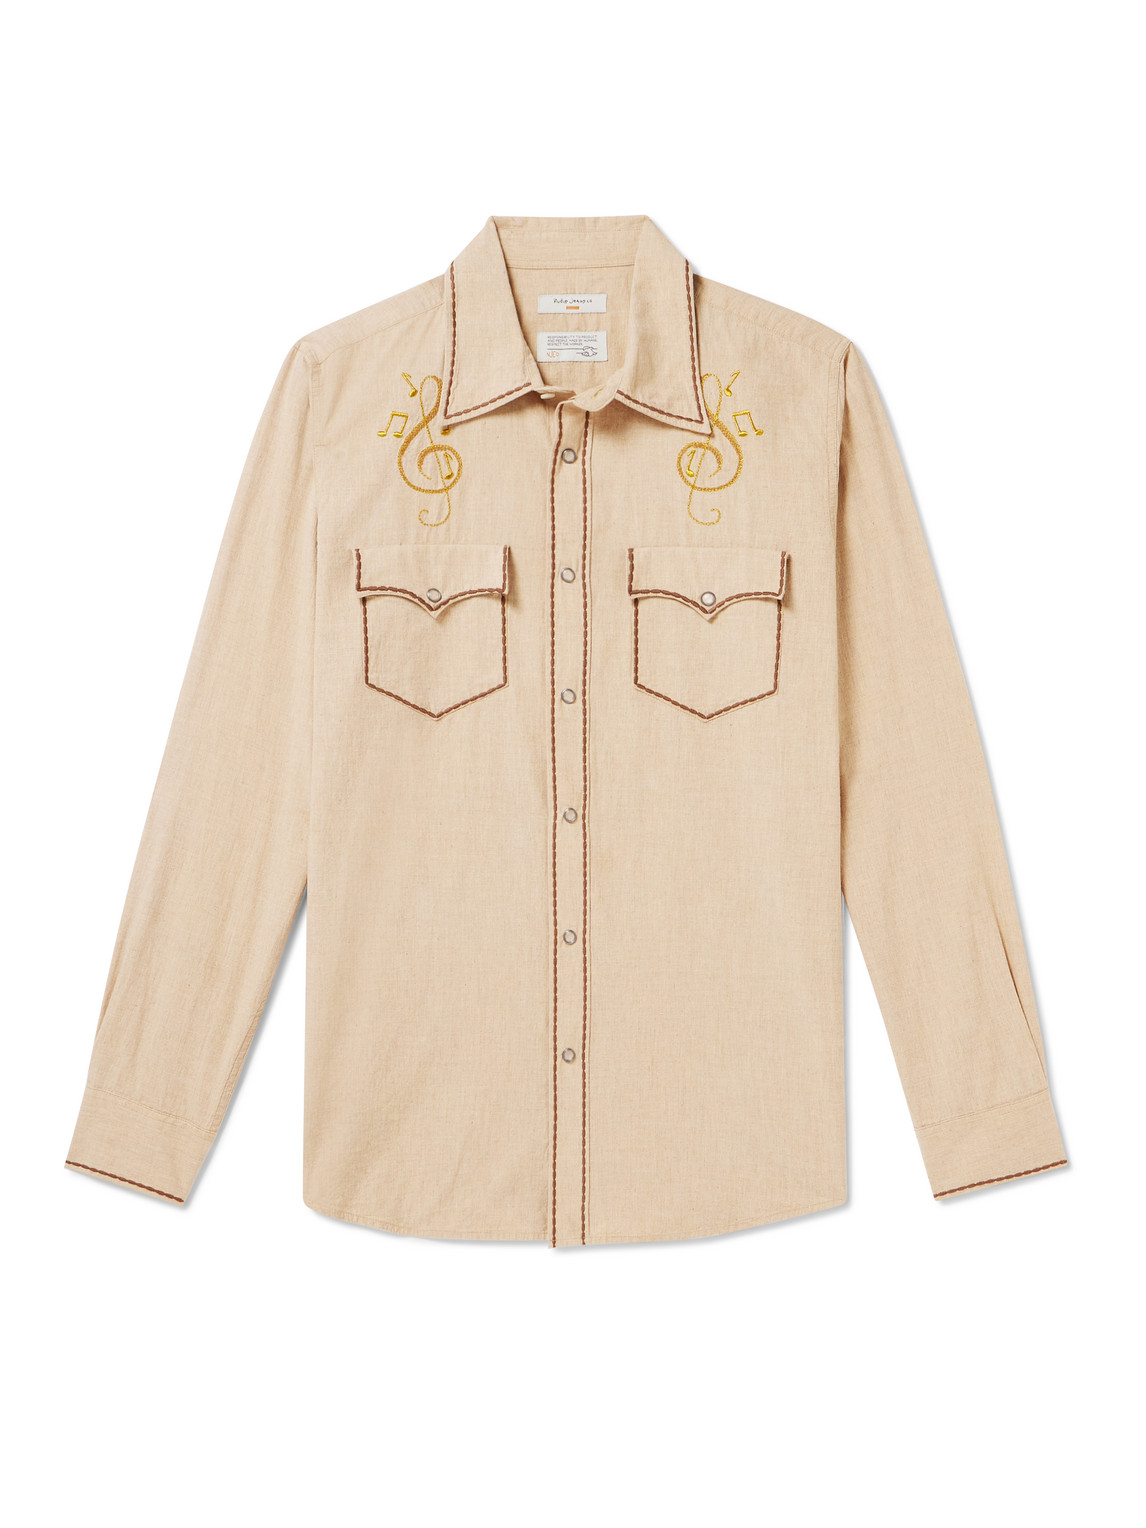 NUDIE JEANS GEORGE EMBROIDERED COTTON WESTERN SHIRT